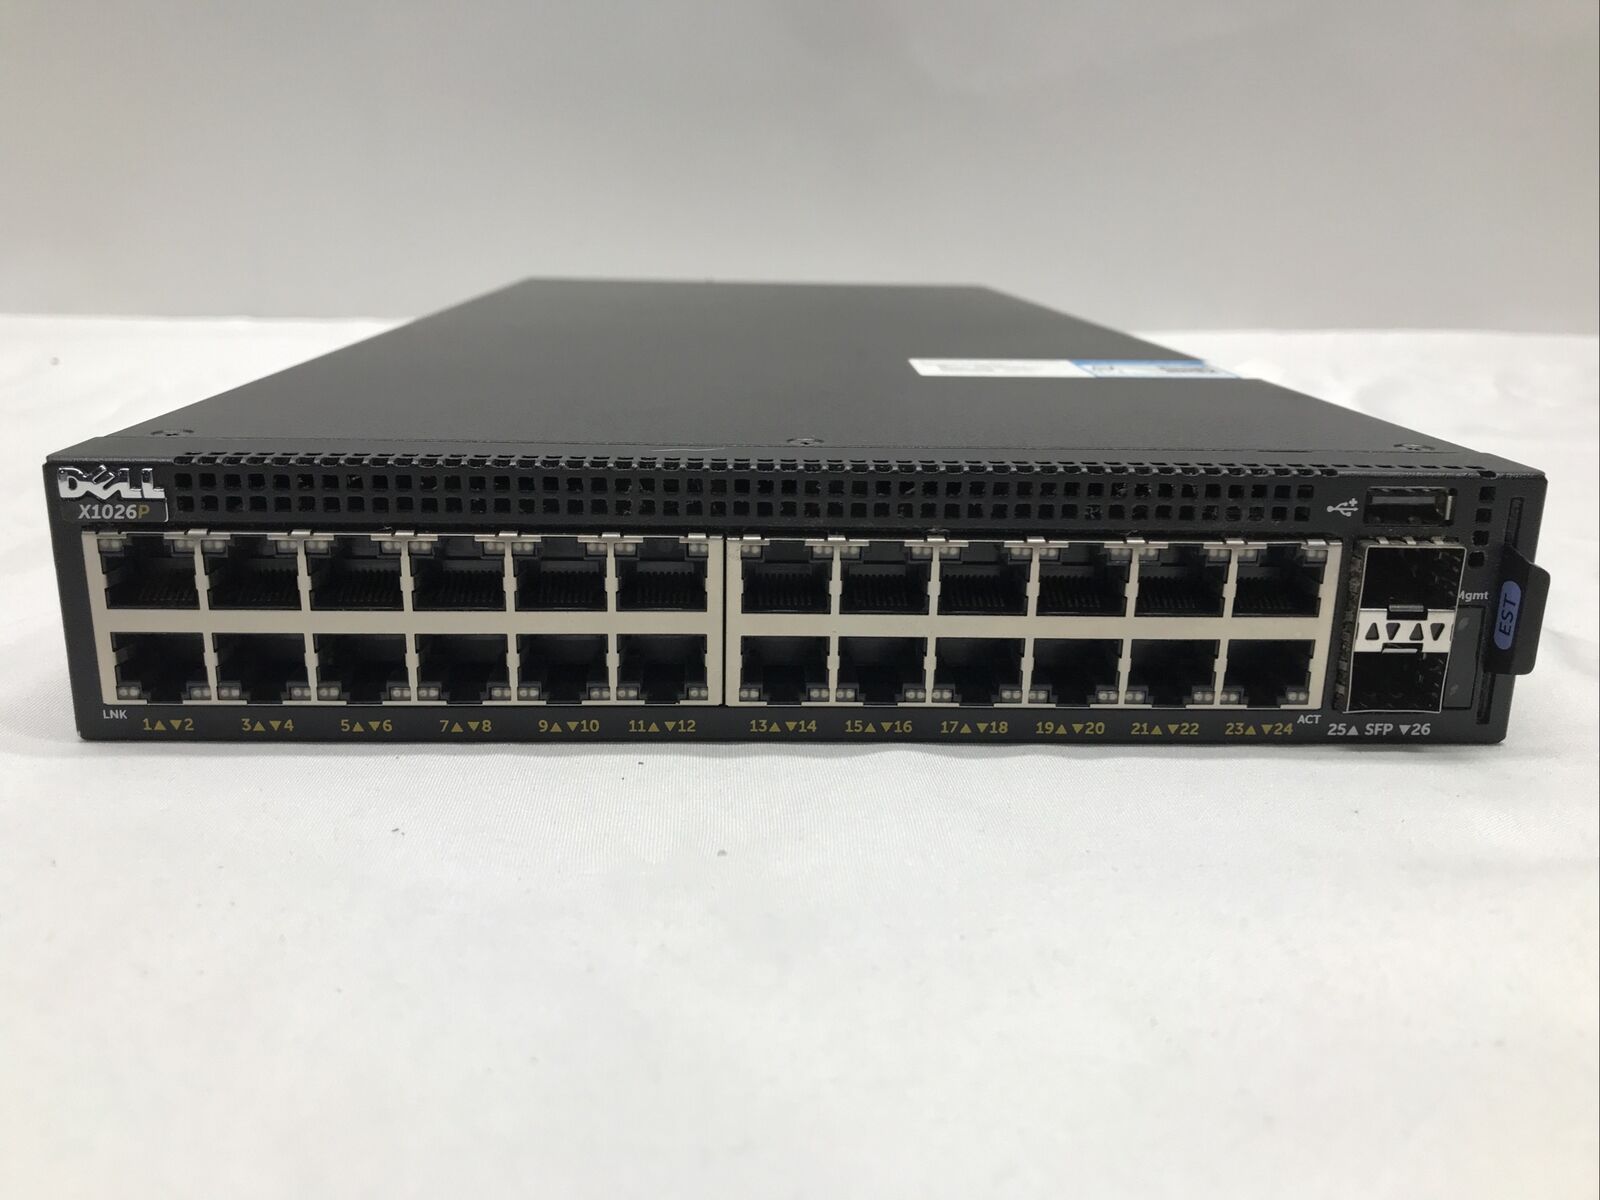 Dell X1026P Networking Managed Rack Switch 24-Ports - EB742